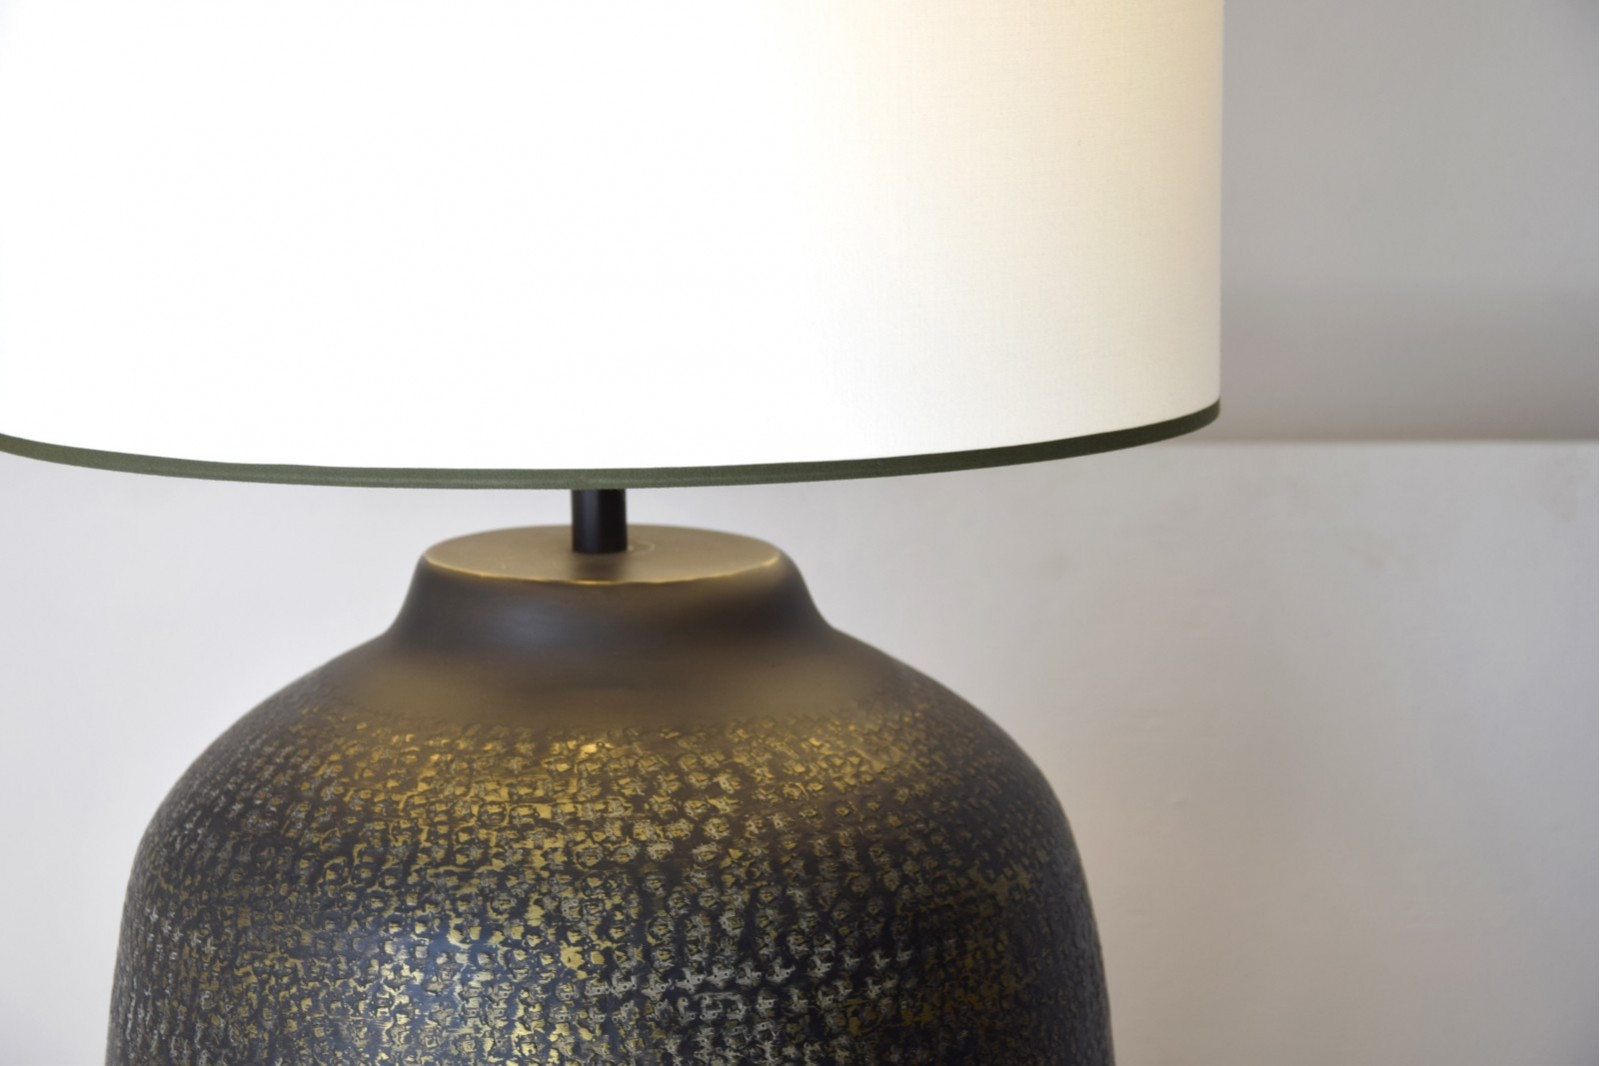 METAL TABLE LAMP N4 WITH SHADE